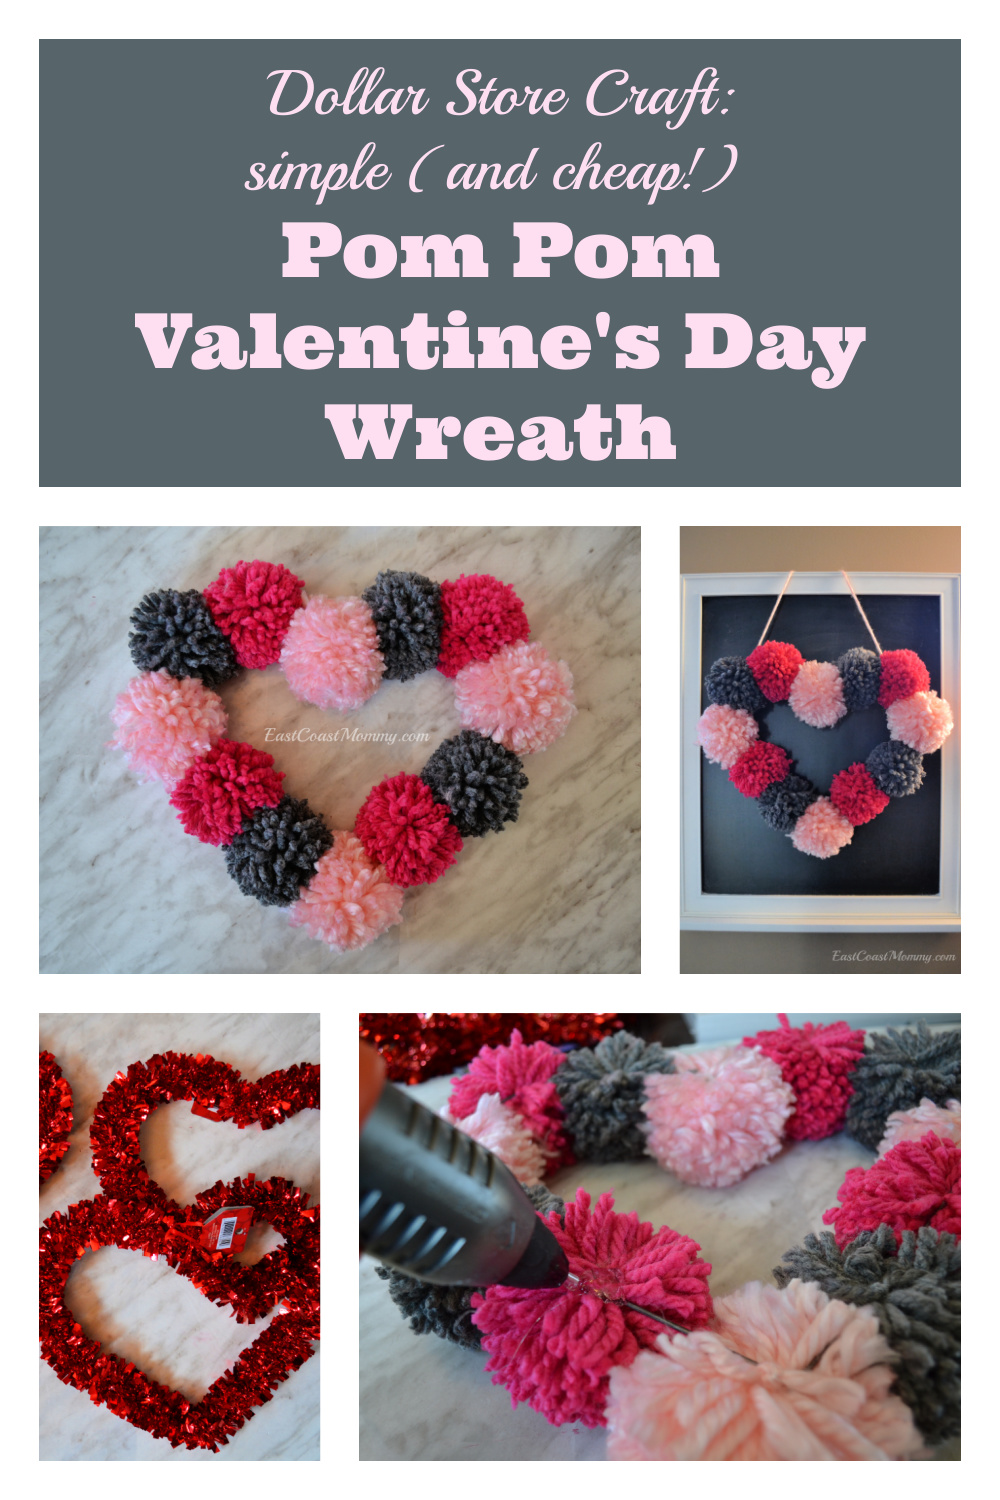 3 NEW Dollar Store Heart Wreath Ideas - Perfect for Valentine's Day